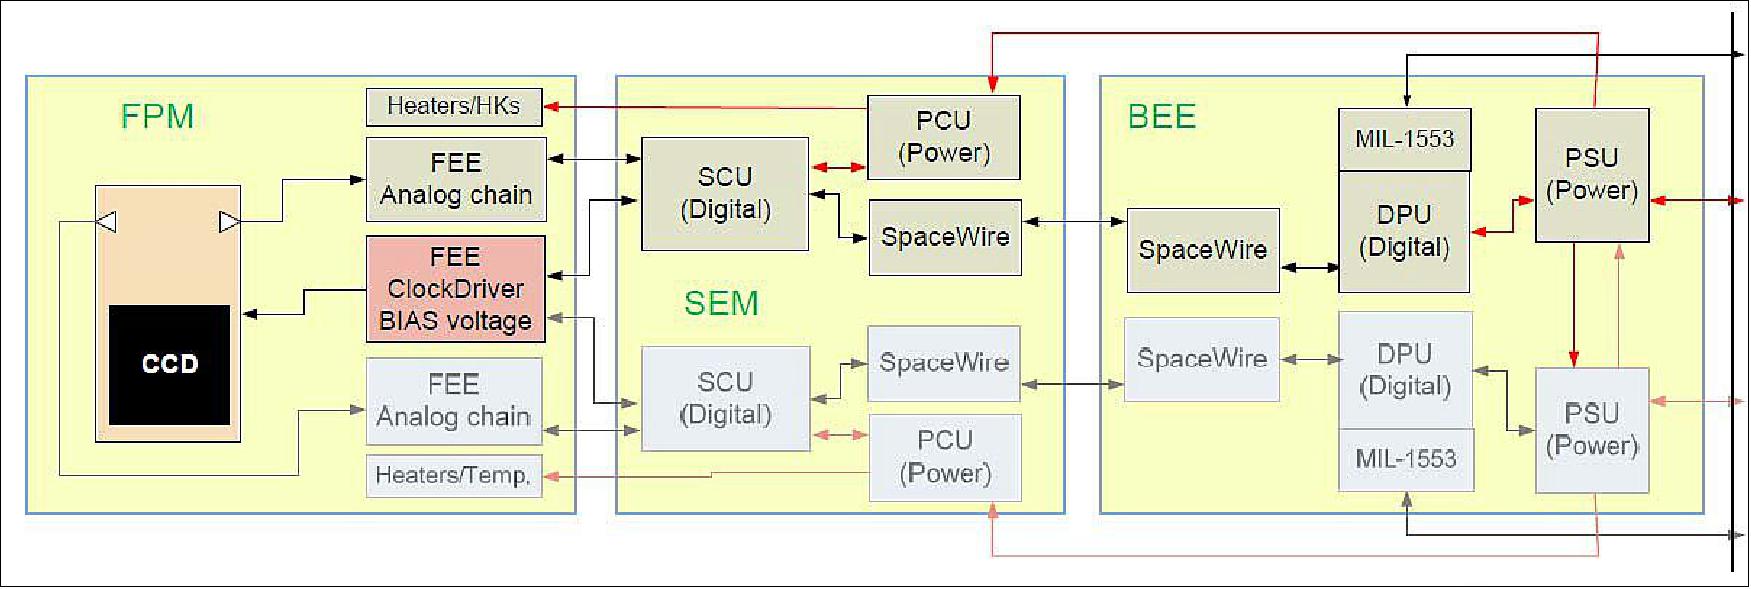 Figure 42: CHEOPS electrical subsystem fault tolerance architecture (image credit: DLR)